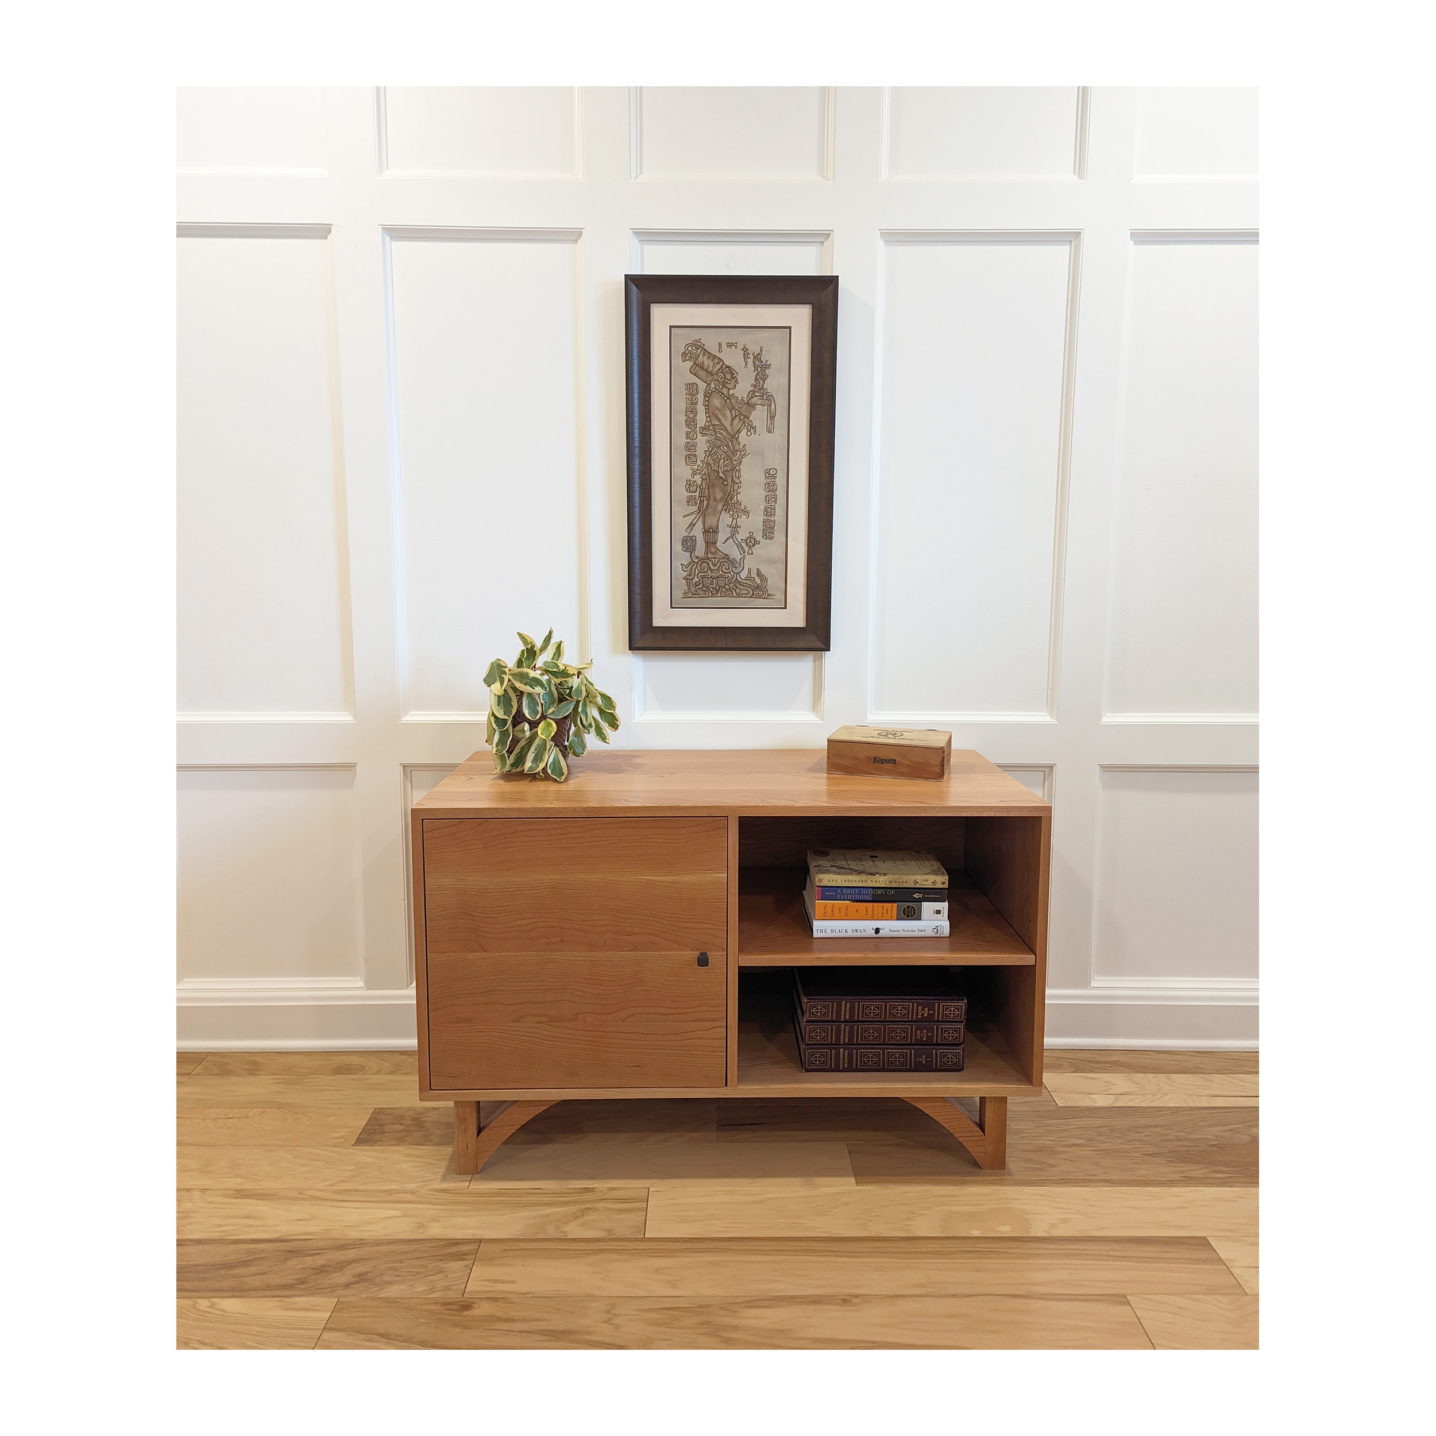 Cherry single door tv stand with solid wood construction